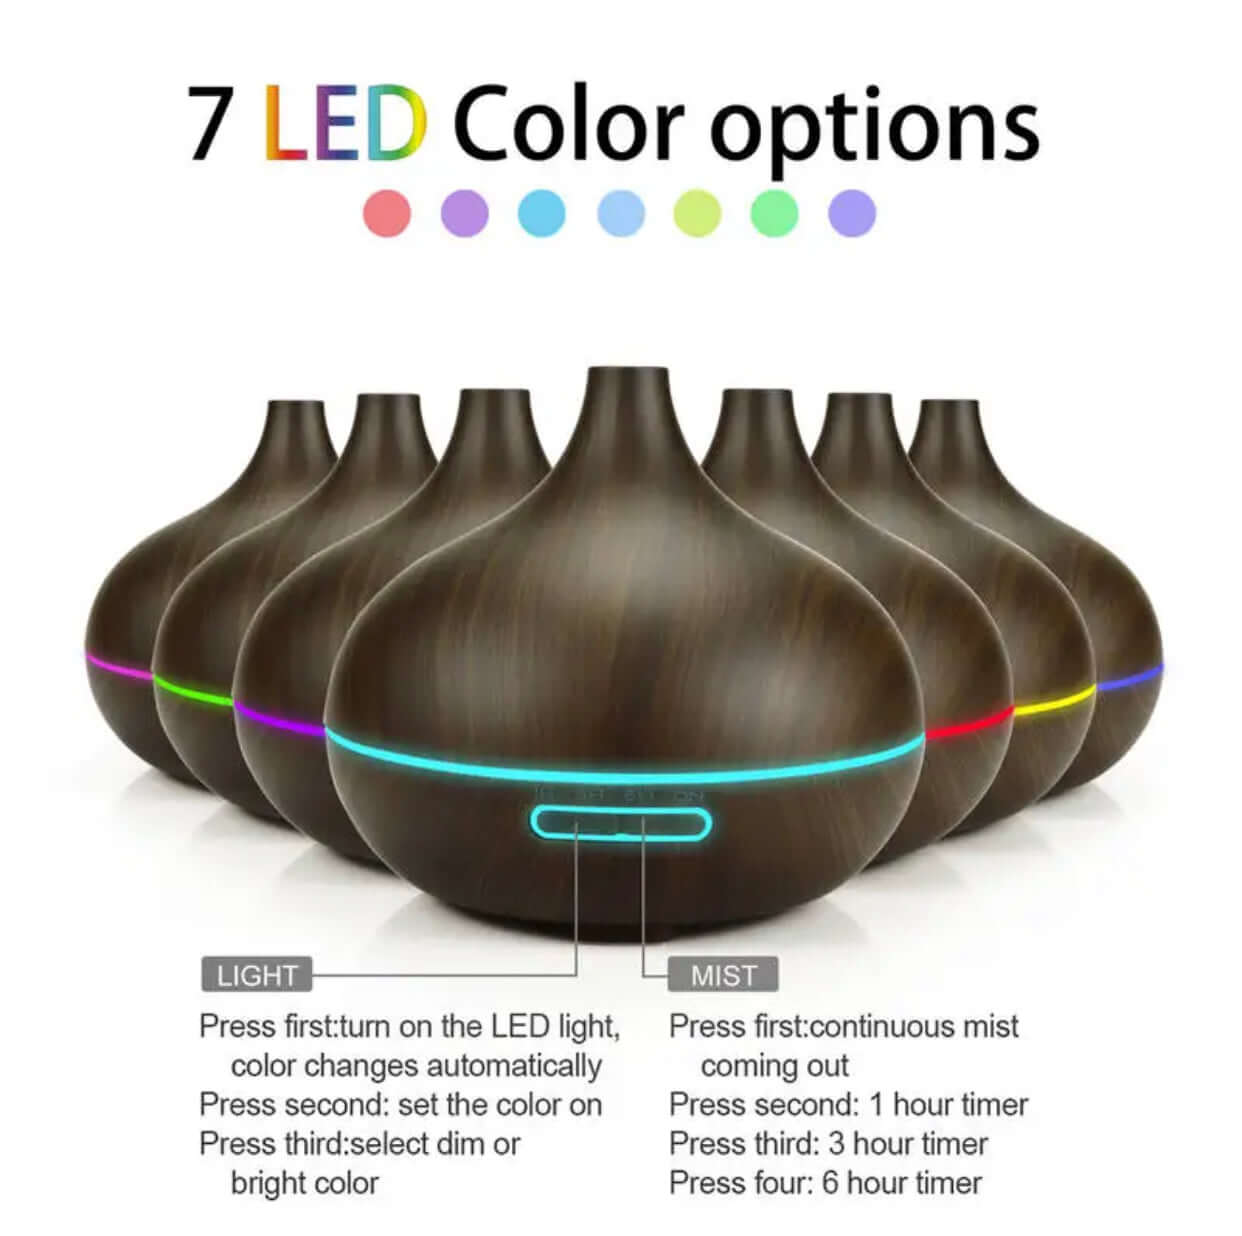 Electric aroma diffuser 500 ml with LED lighting: A touch of wellness for your home